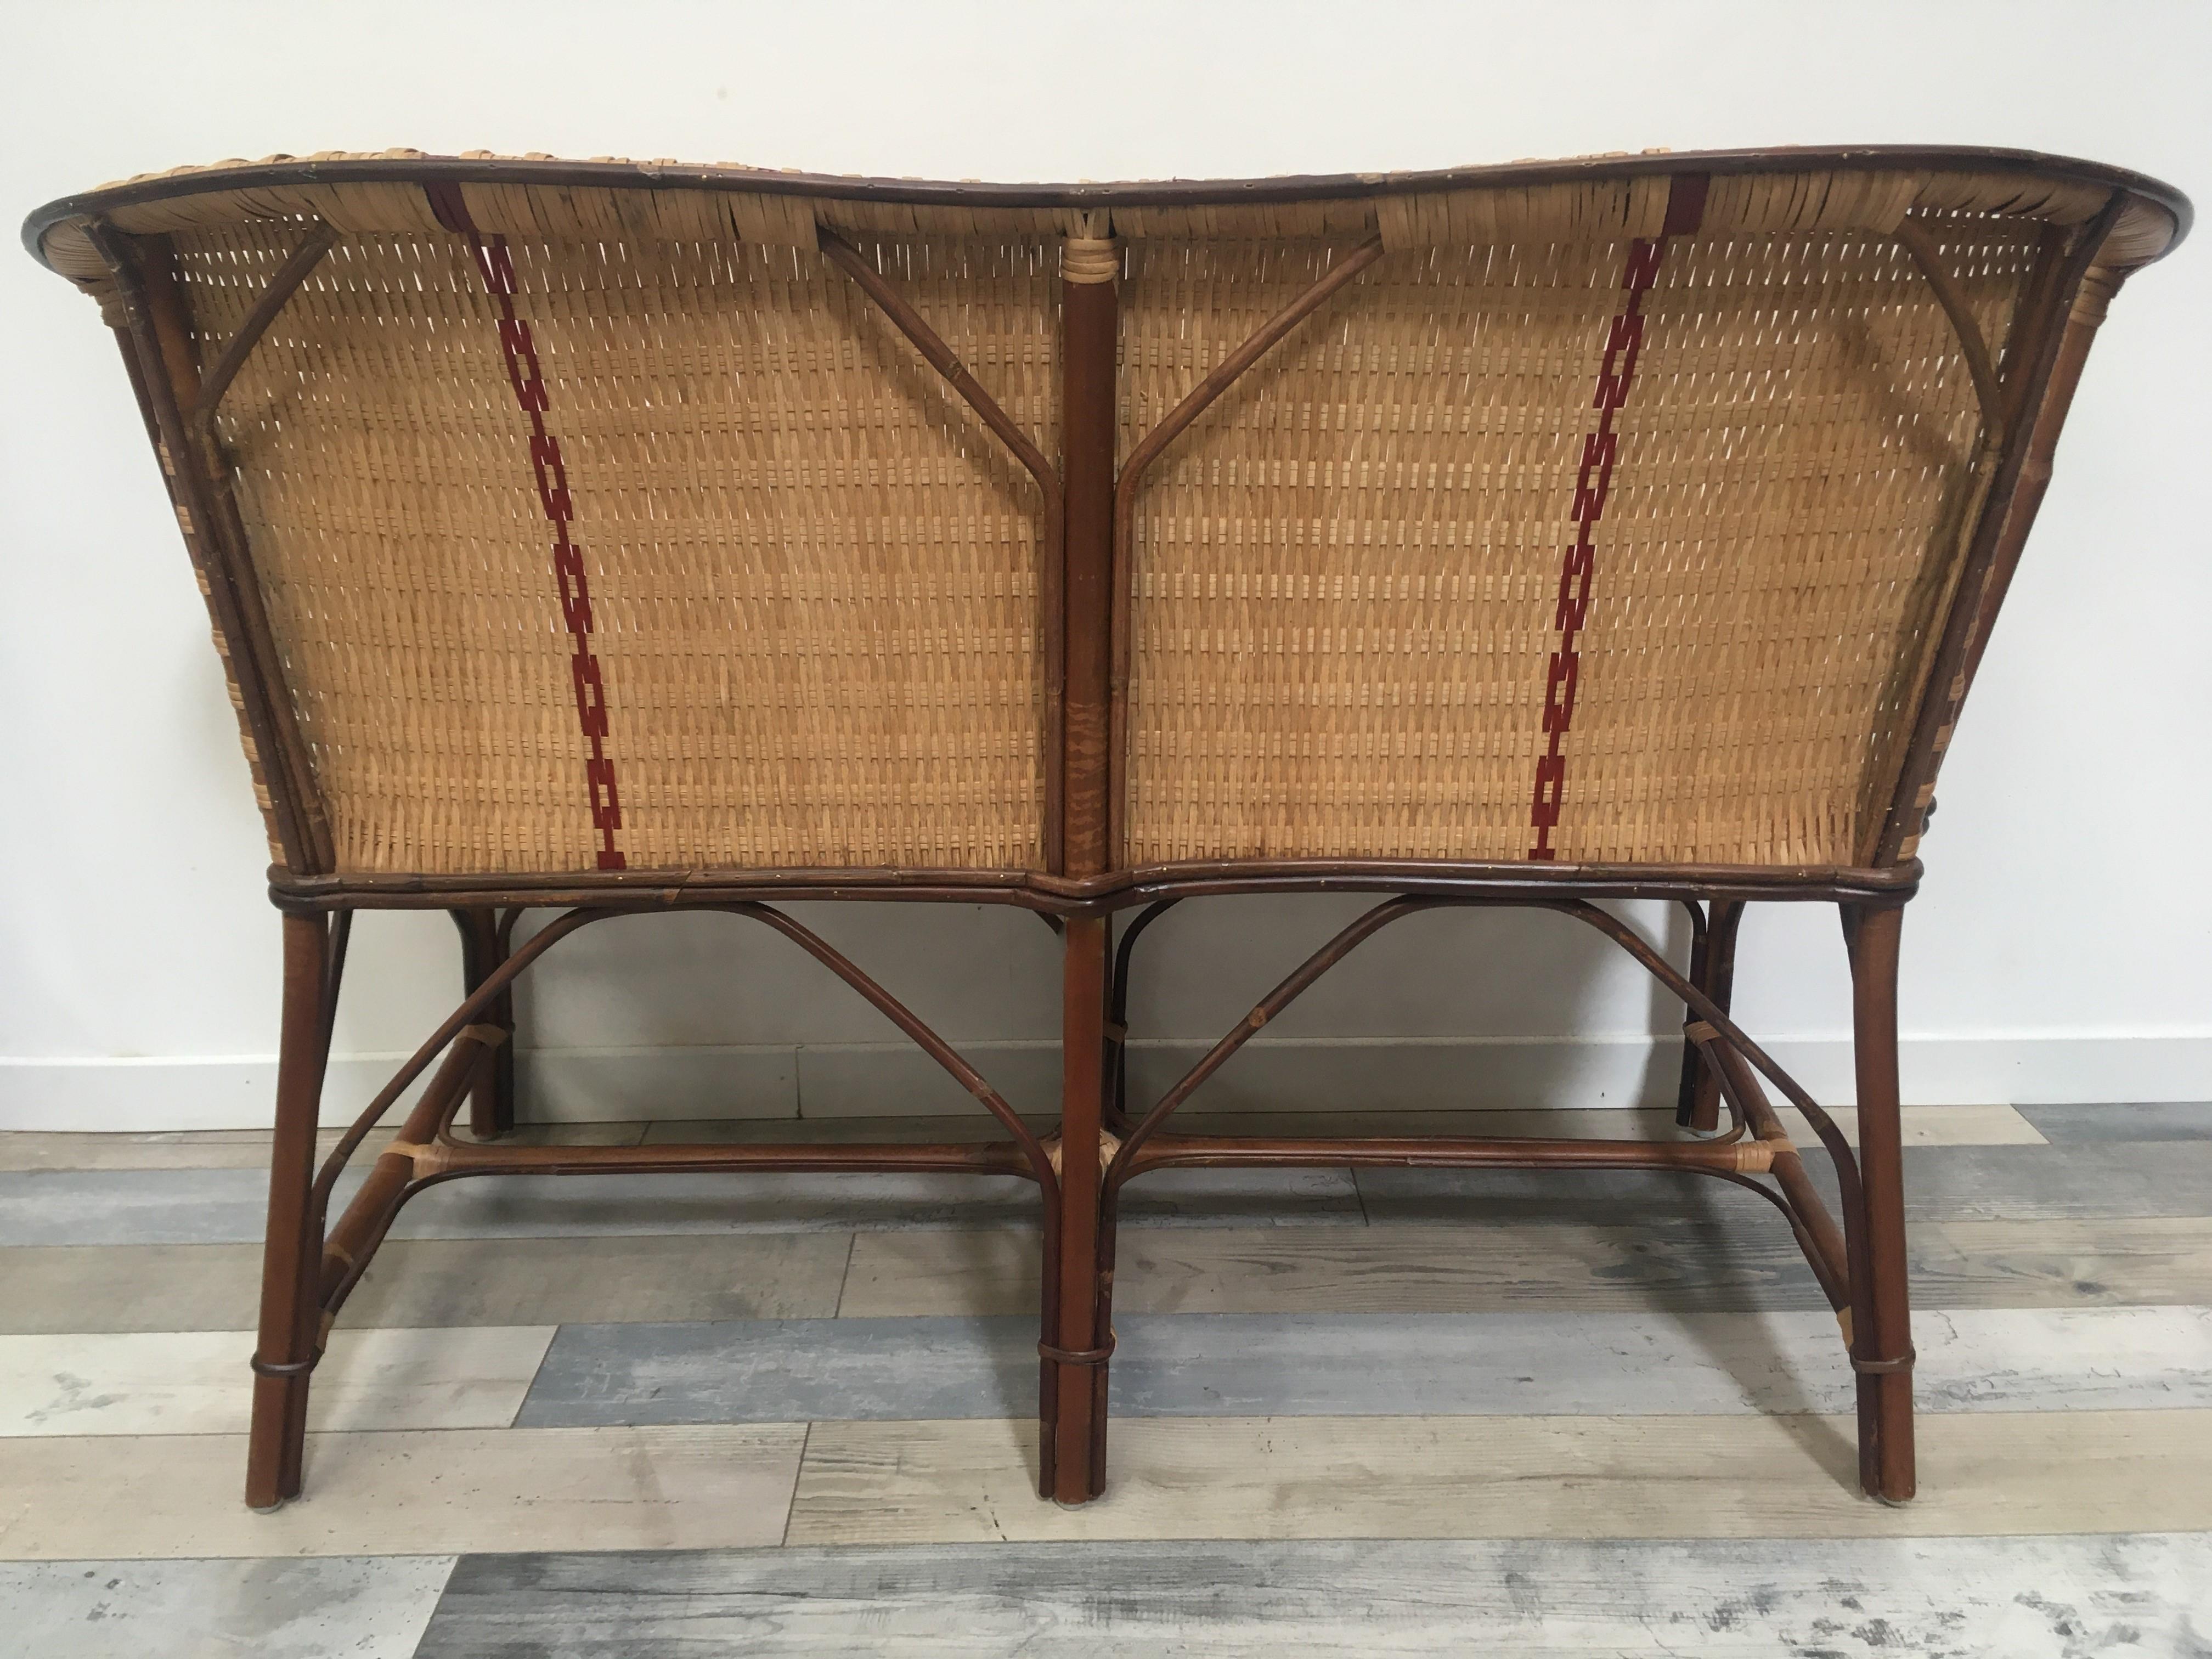 French 1900s Design Bistro Style Sofa In Rattan and Braided Wicker Cane For Sale 9